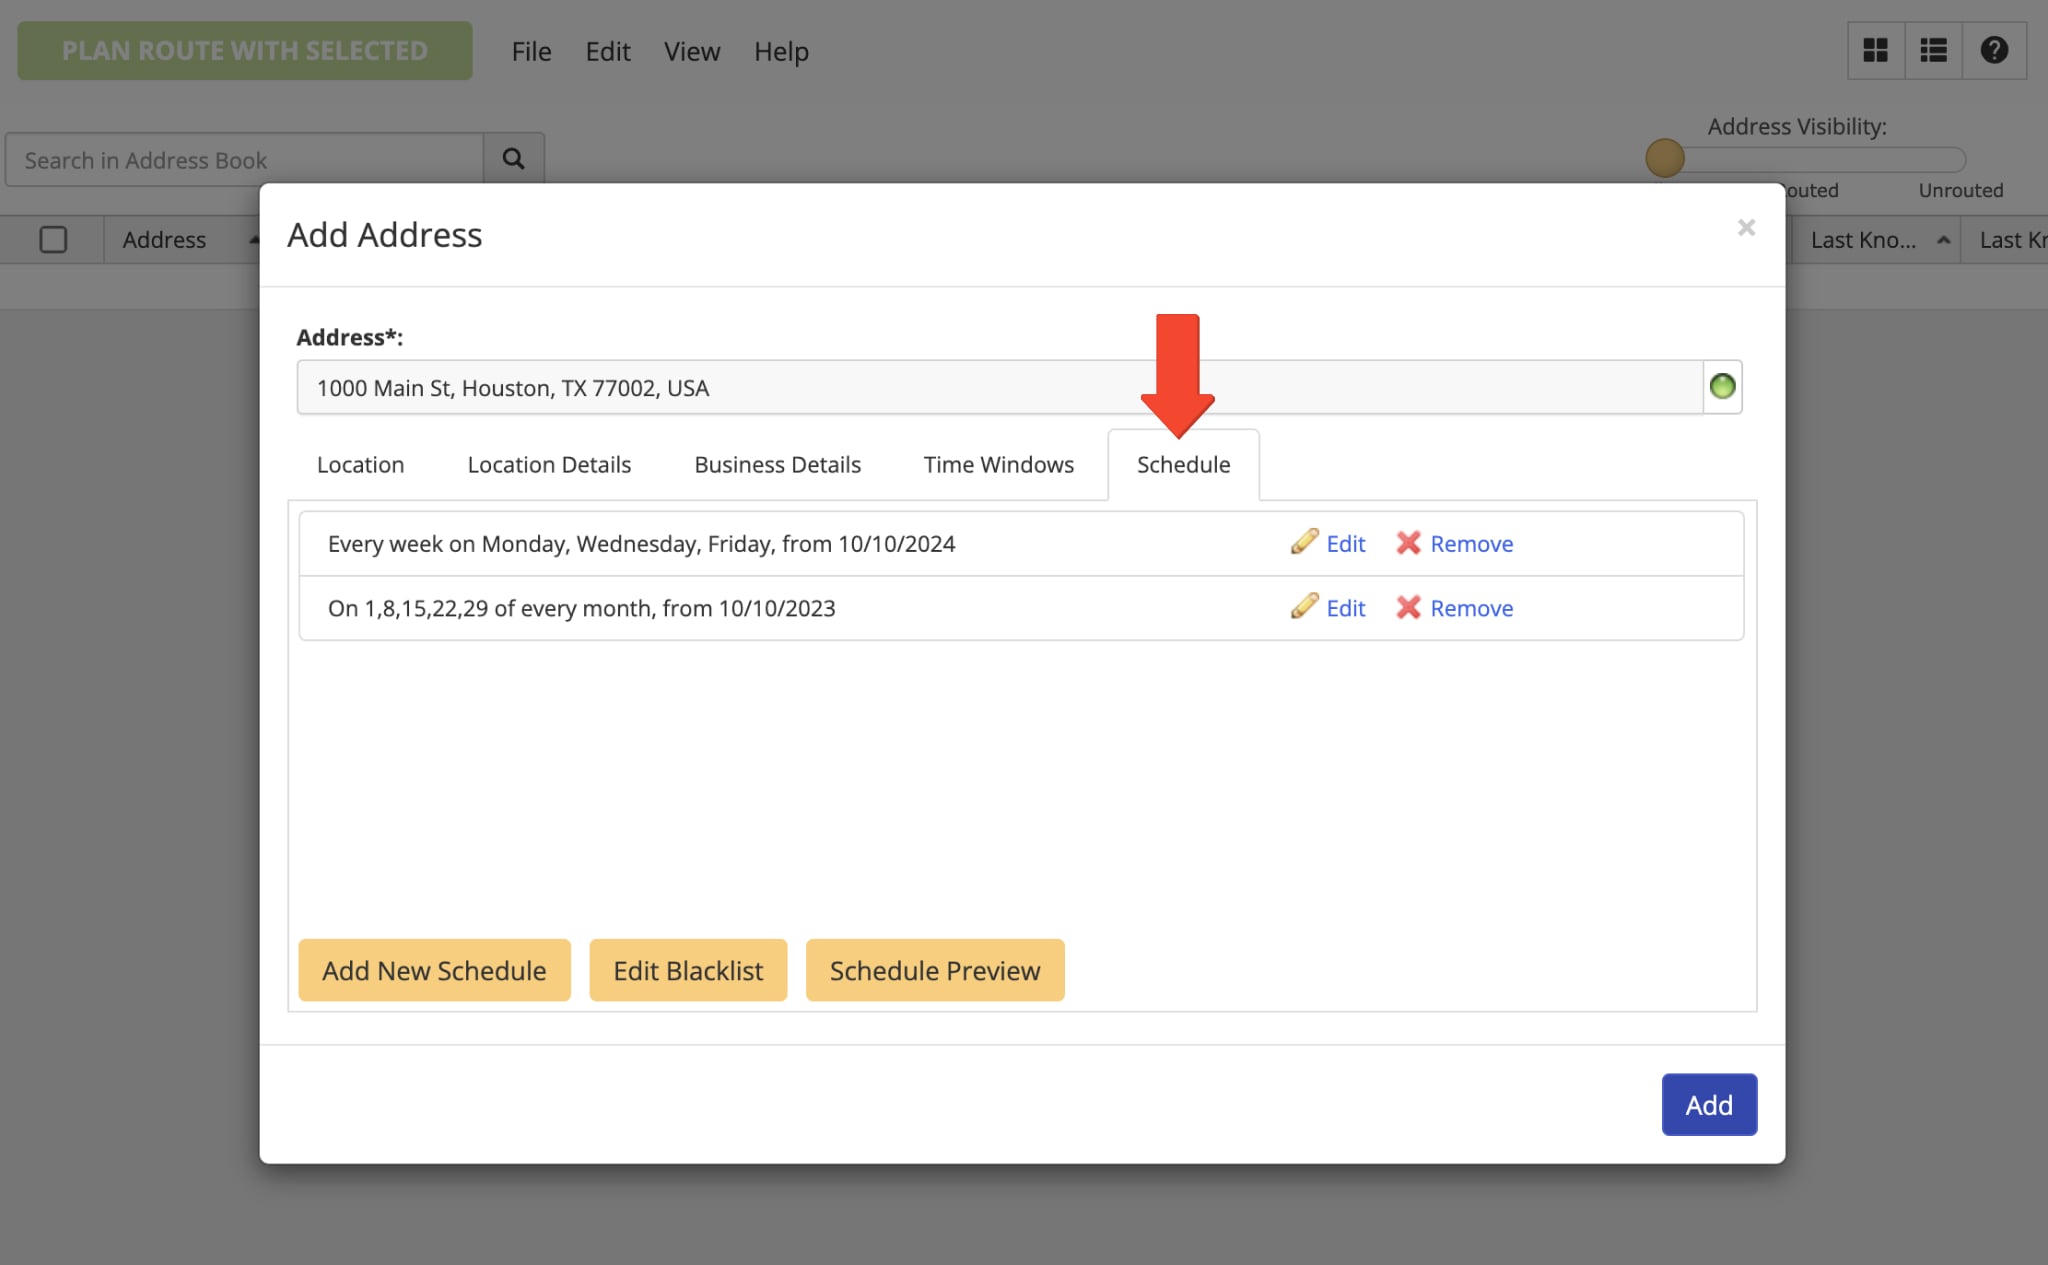 In the address "Schedule" tab, you can add a custom recurring schedule for visiting the address.